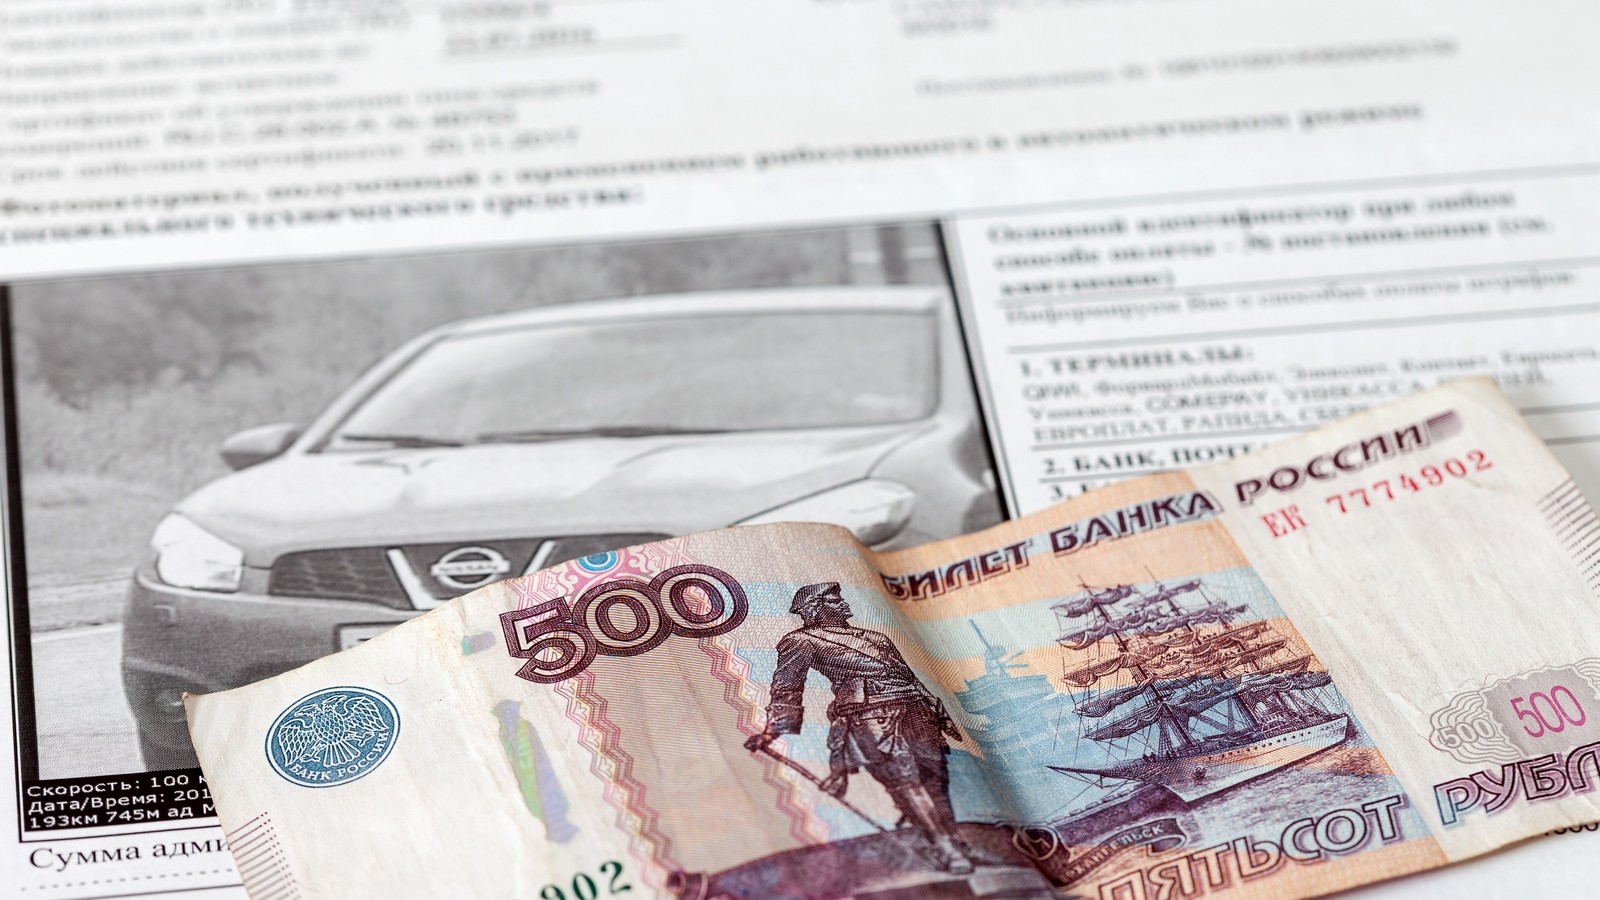 SAMARA, RUSSIA — OCTOBER 9, 2014: Receipt for payment of a fine for violation of traffic rules and money